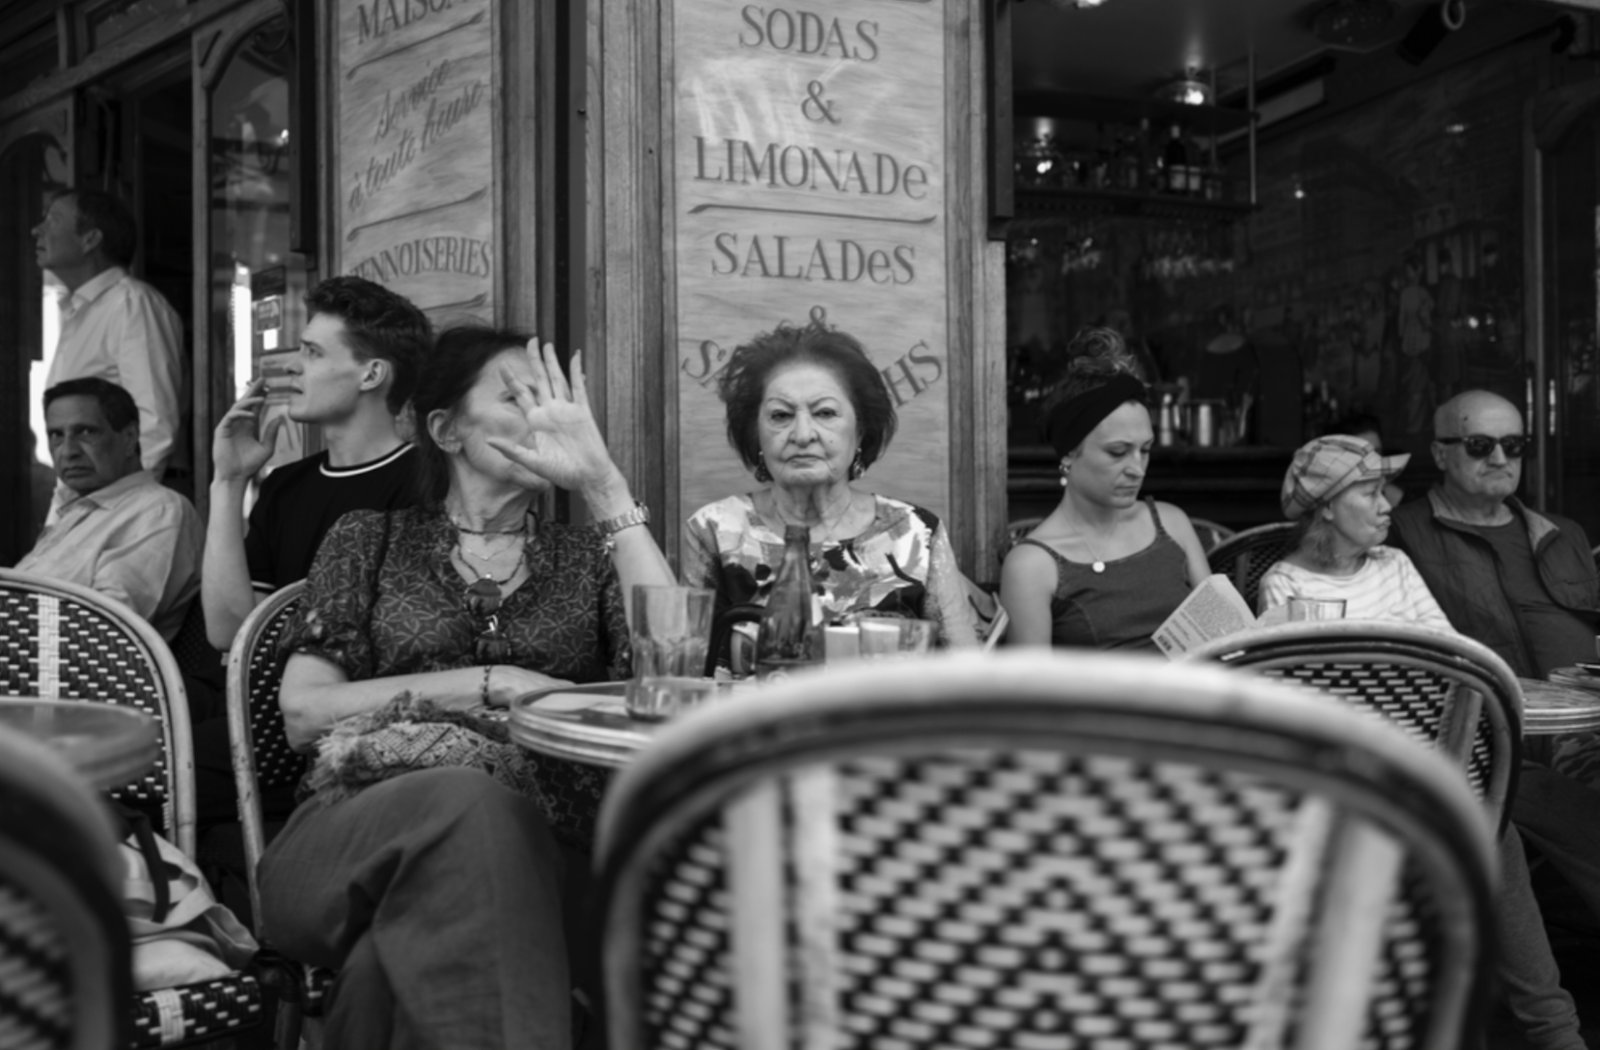 A black and white image of Italian locals, sitting in front of a cafe, chatting and interacting with each other.